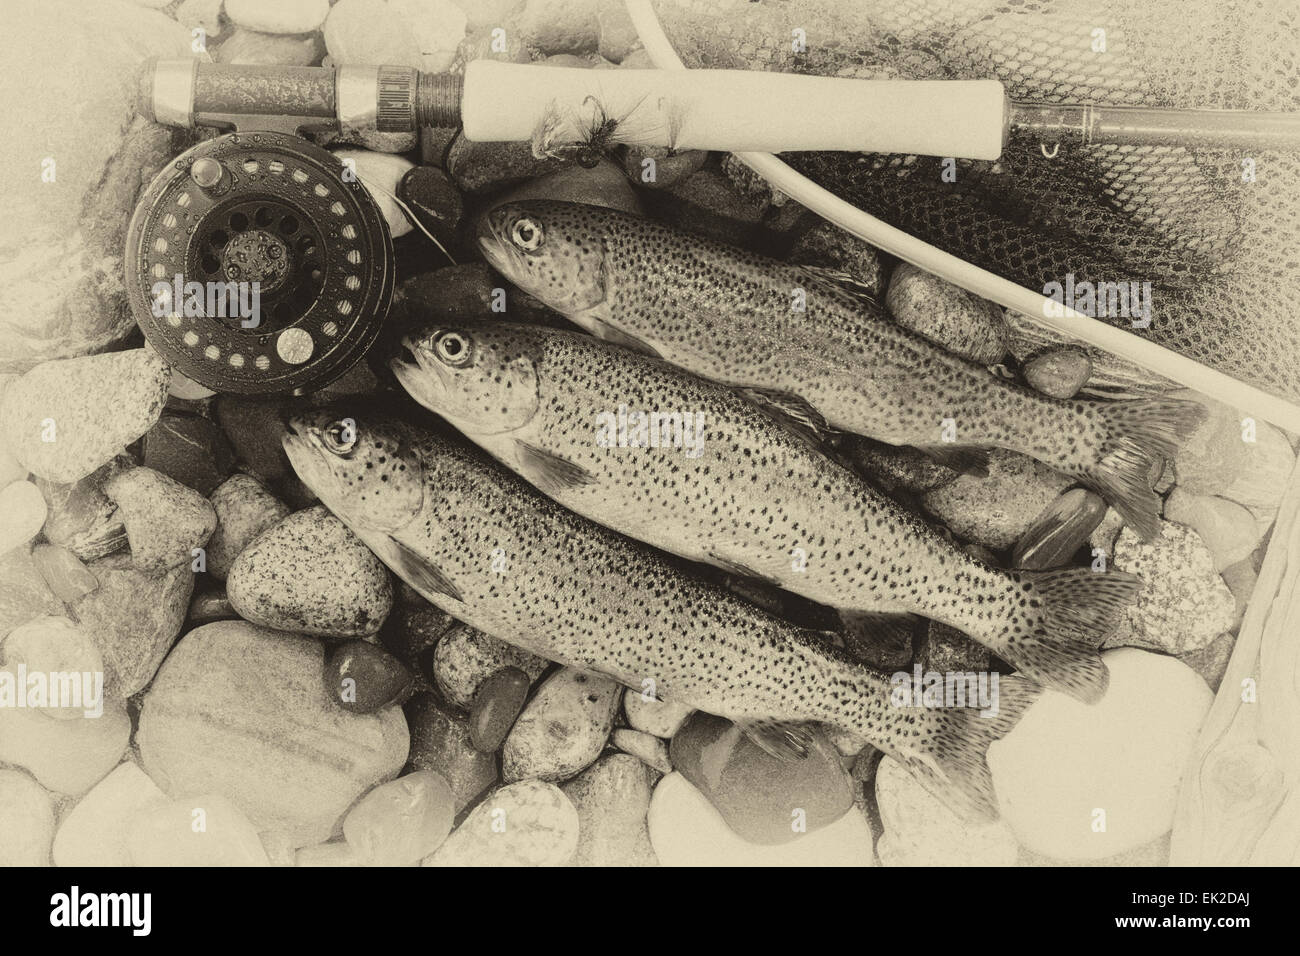 Three wild trout with fishing fly reel, landing net and assorted